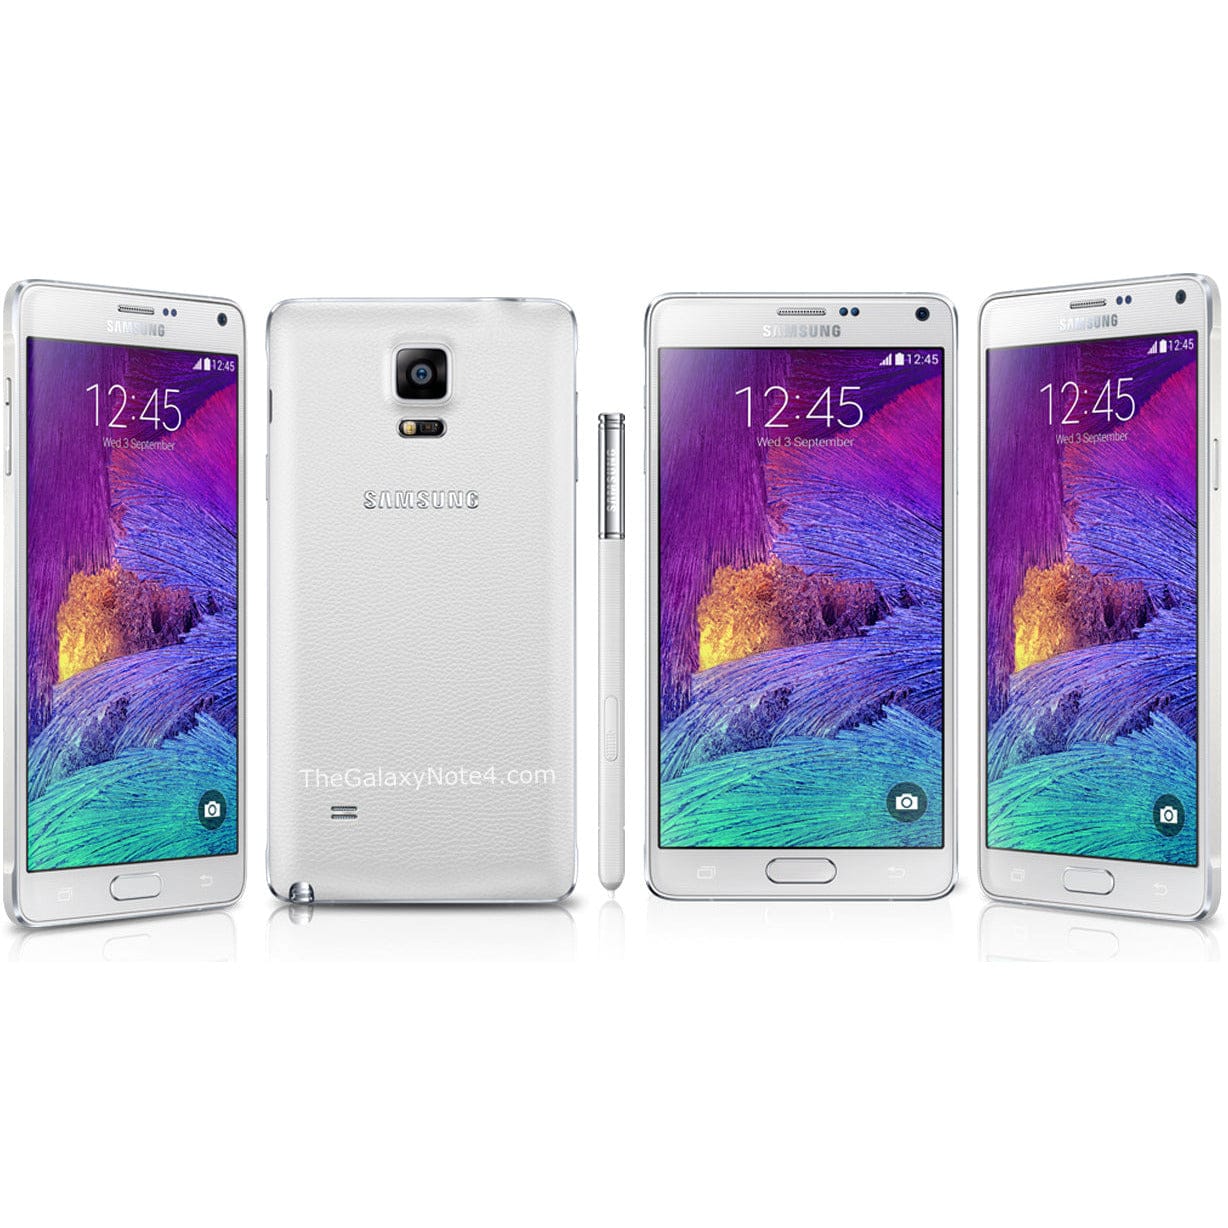 Samsung GALAXY Note 4 Android Cell-Phone 32 GB - Frost white